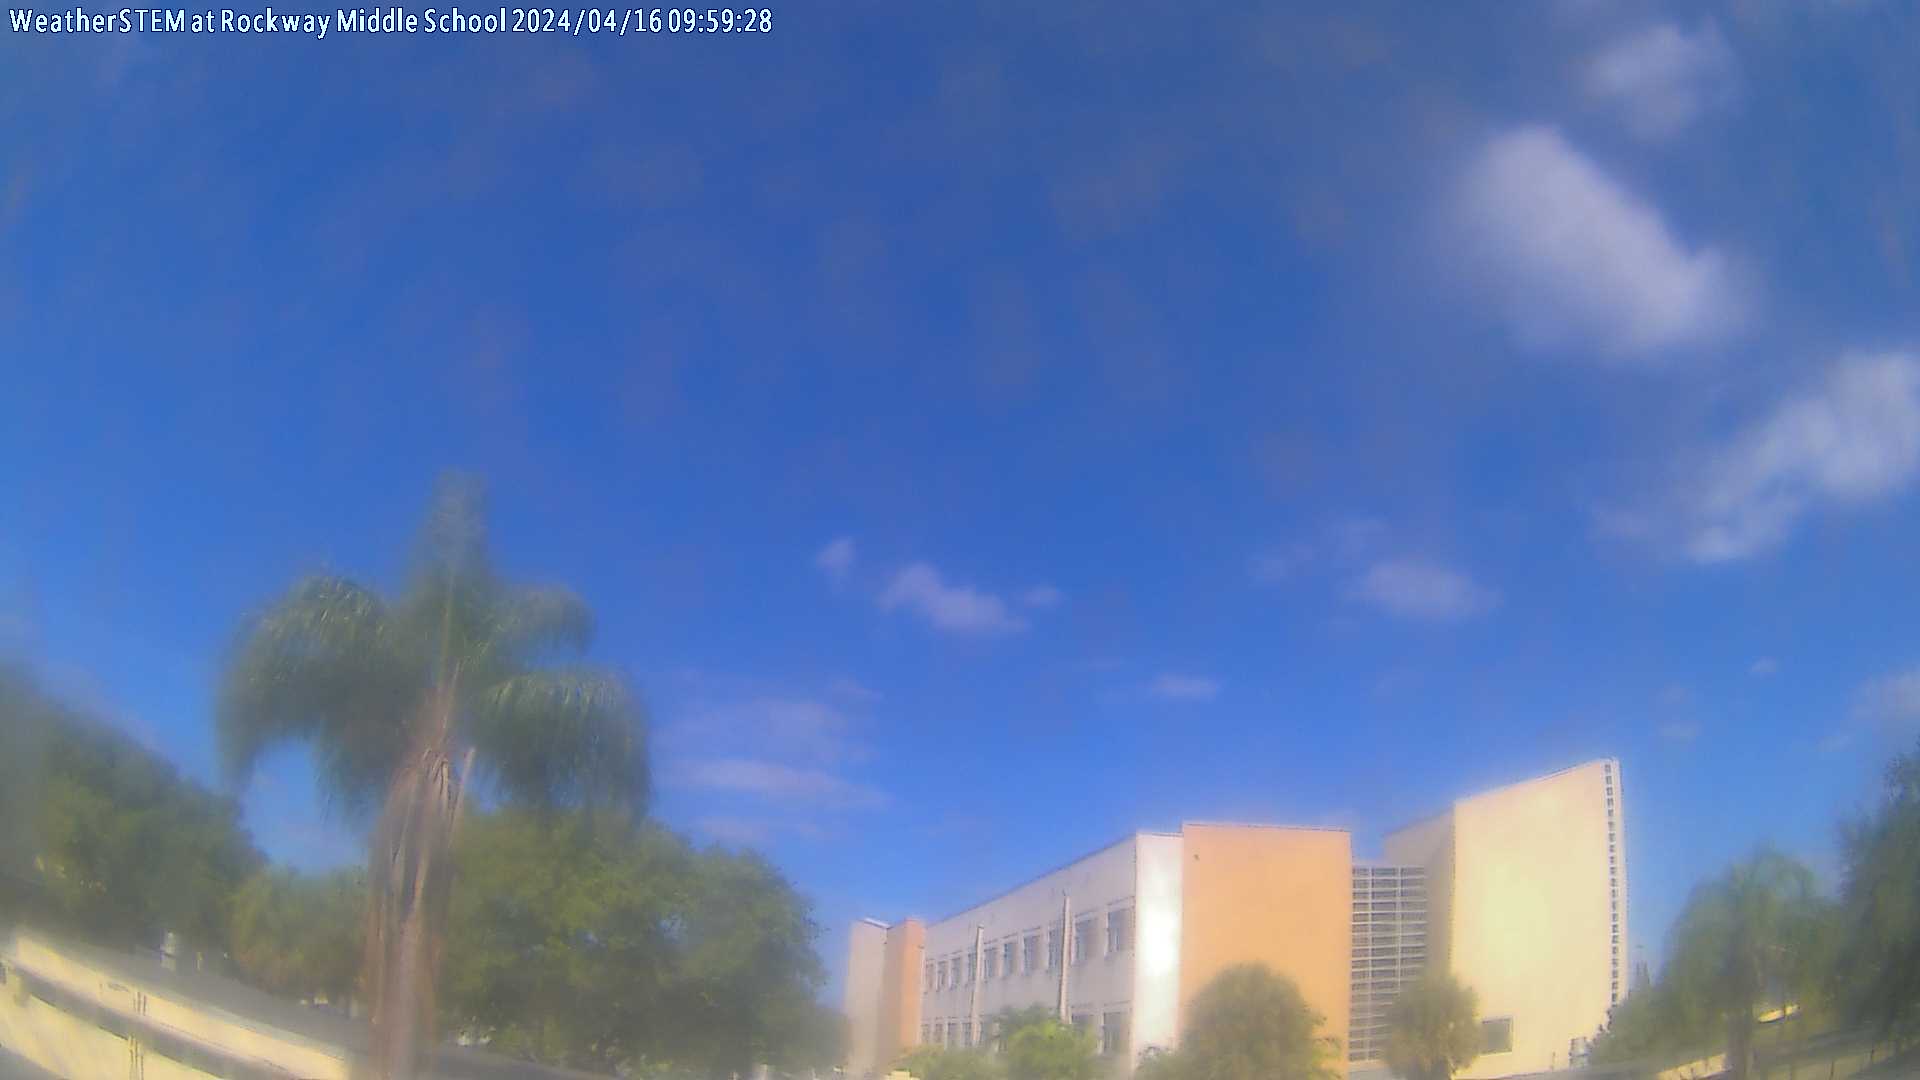  WeatherSTEM Cloud Camera RMSWxSTEM in Miami Dade County, Florida FL at Rockway Middle School